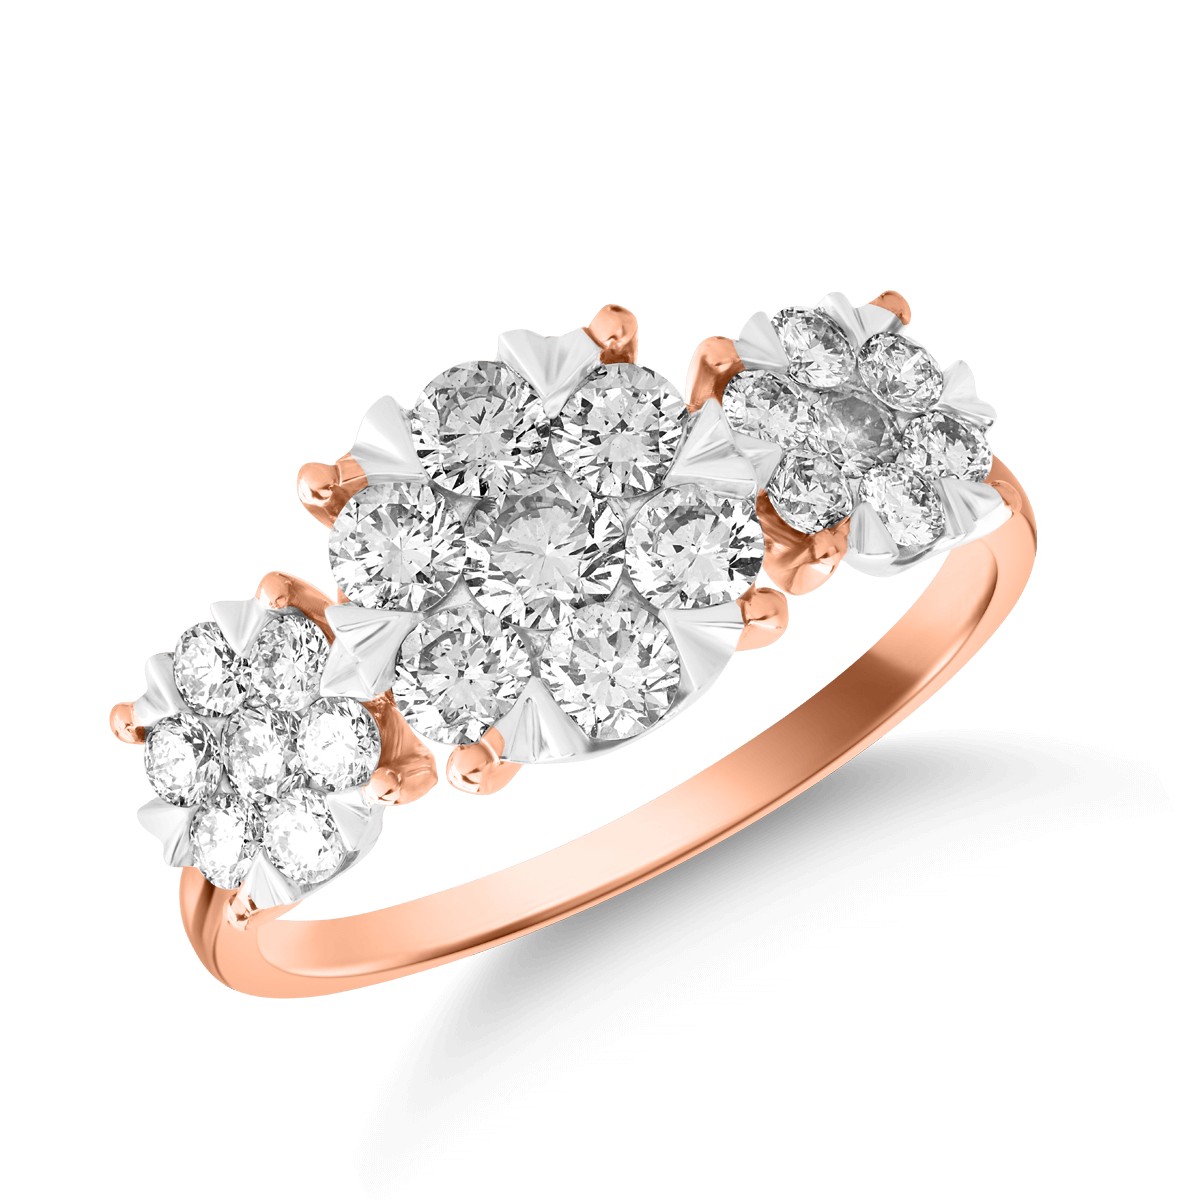 18K rose gold ring with 1ct diamonds